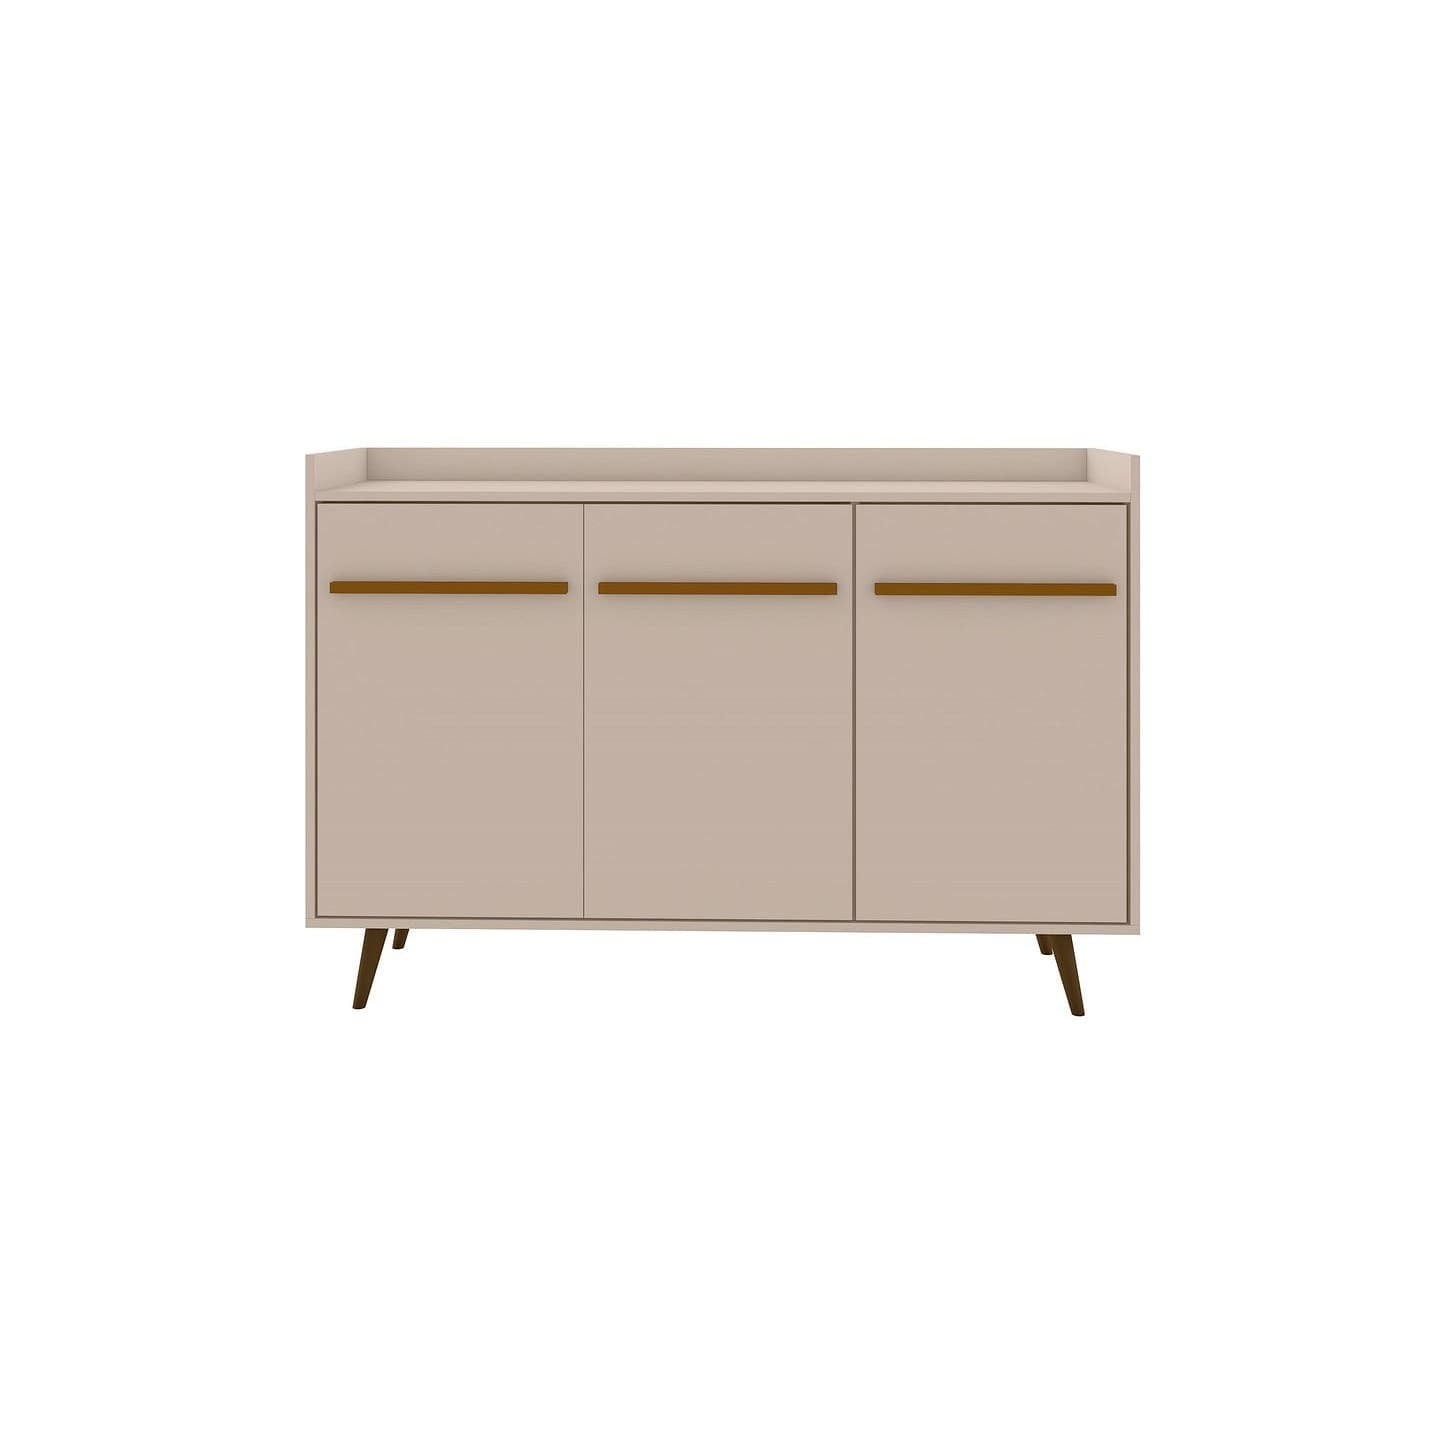 Manhattan Comfort Bradley 53.54 Buffet Stand with 4 Shelves in Off White